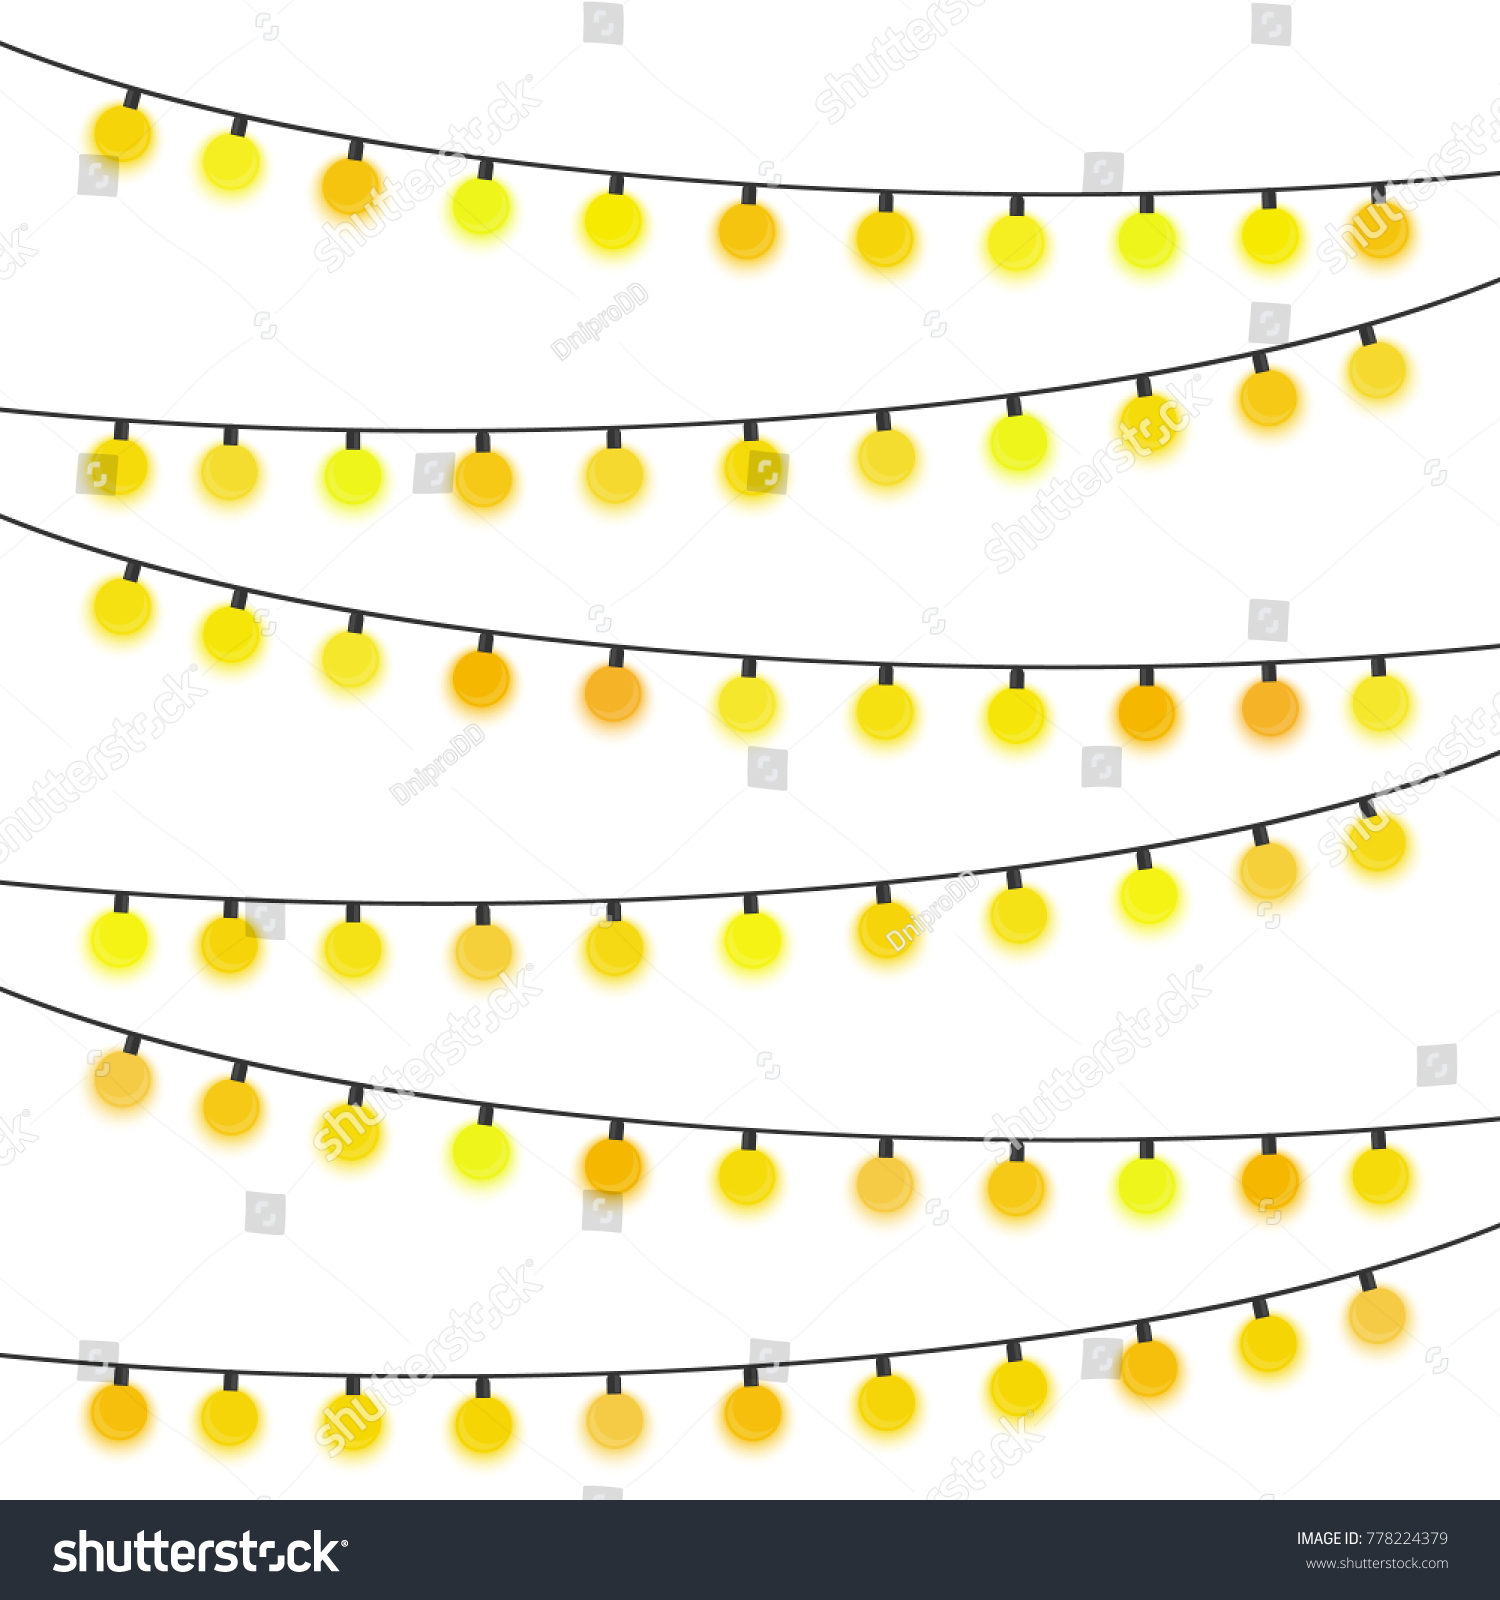 Garland with yellow light bulbs on a white background. Vector illustration.
 #778224379